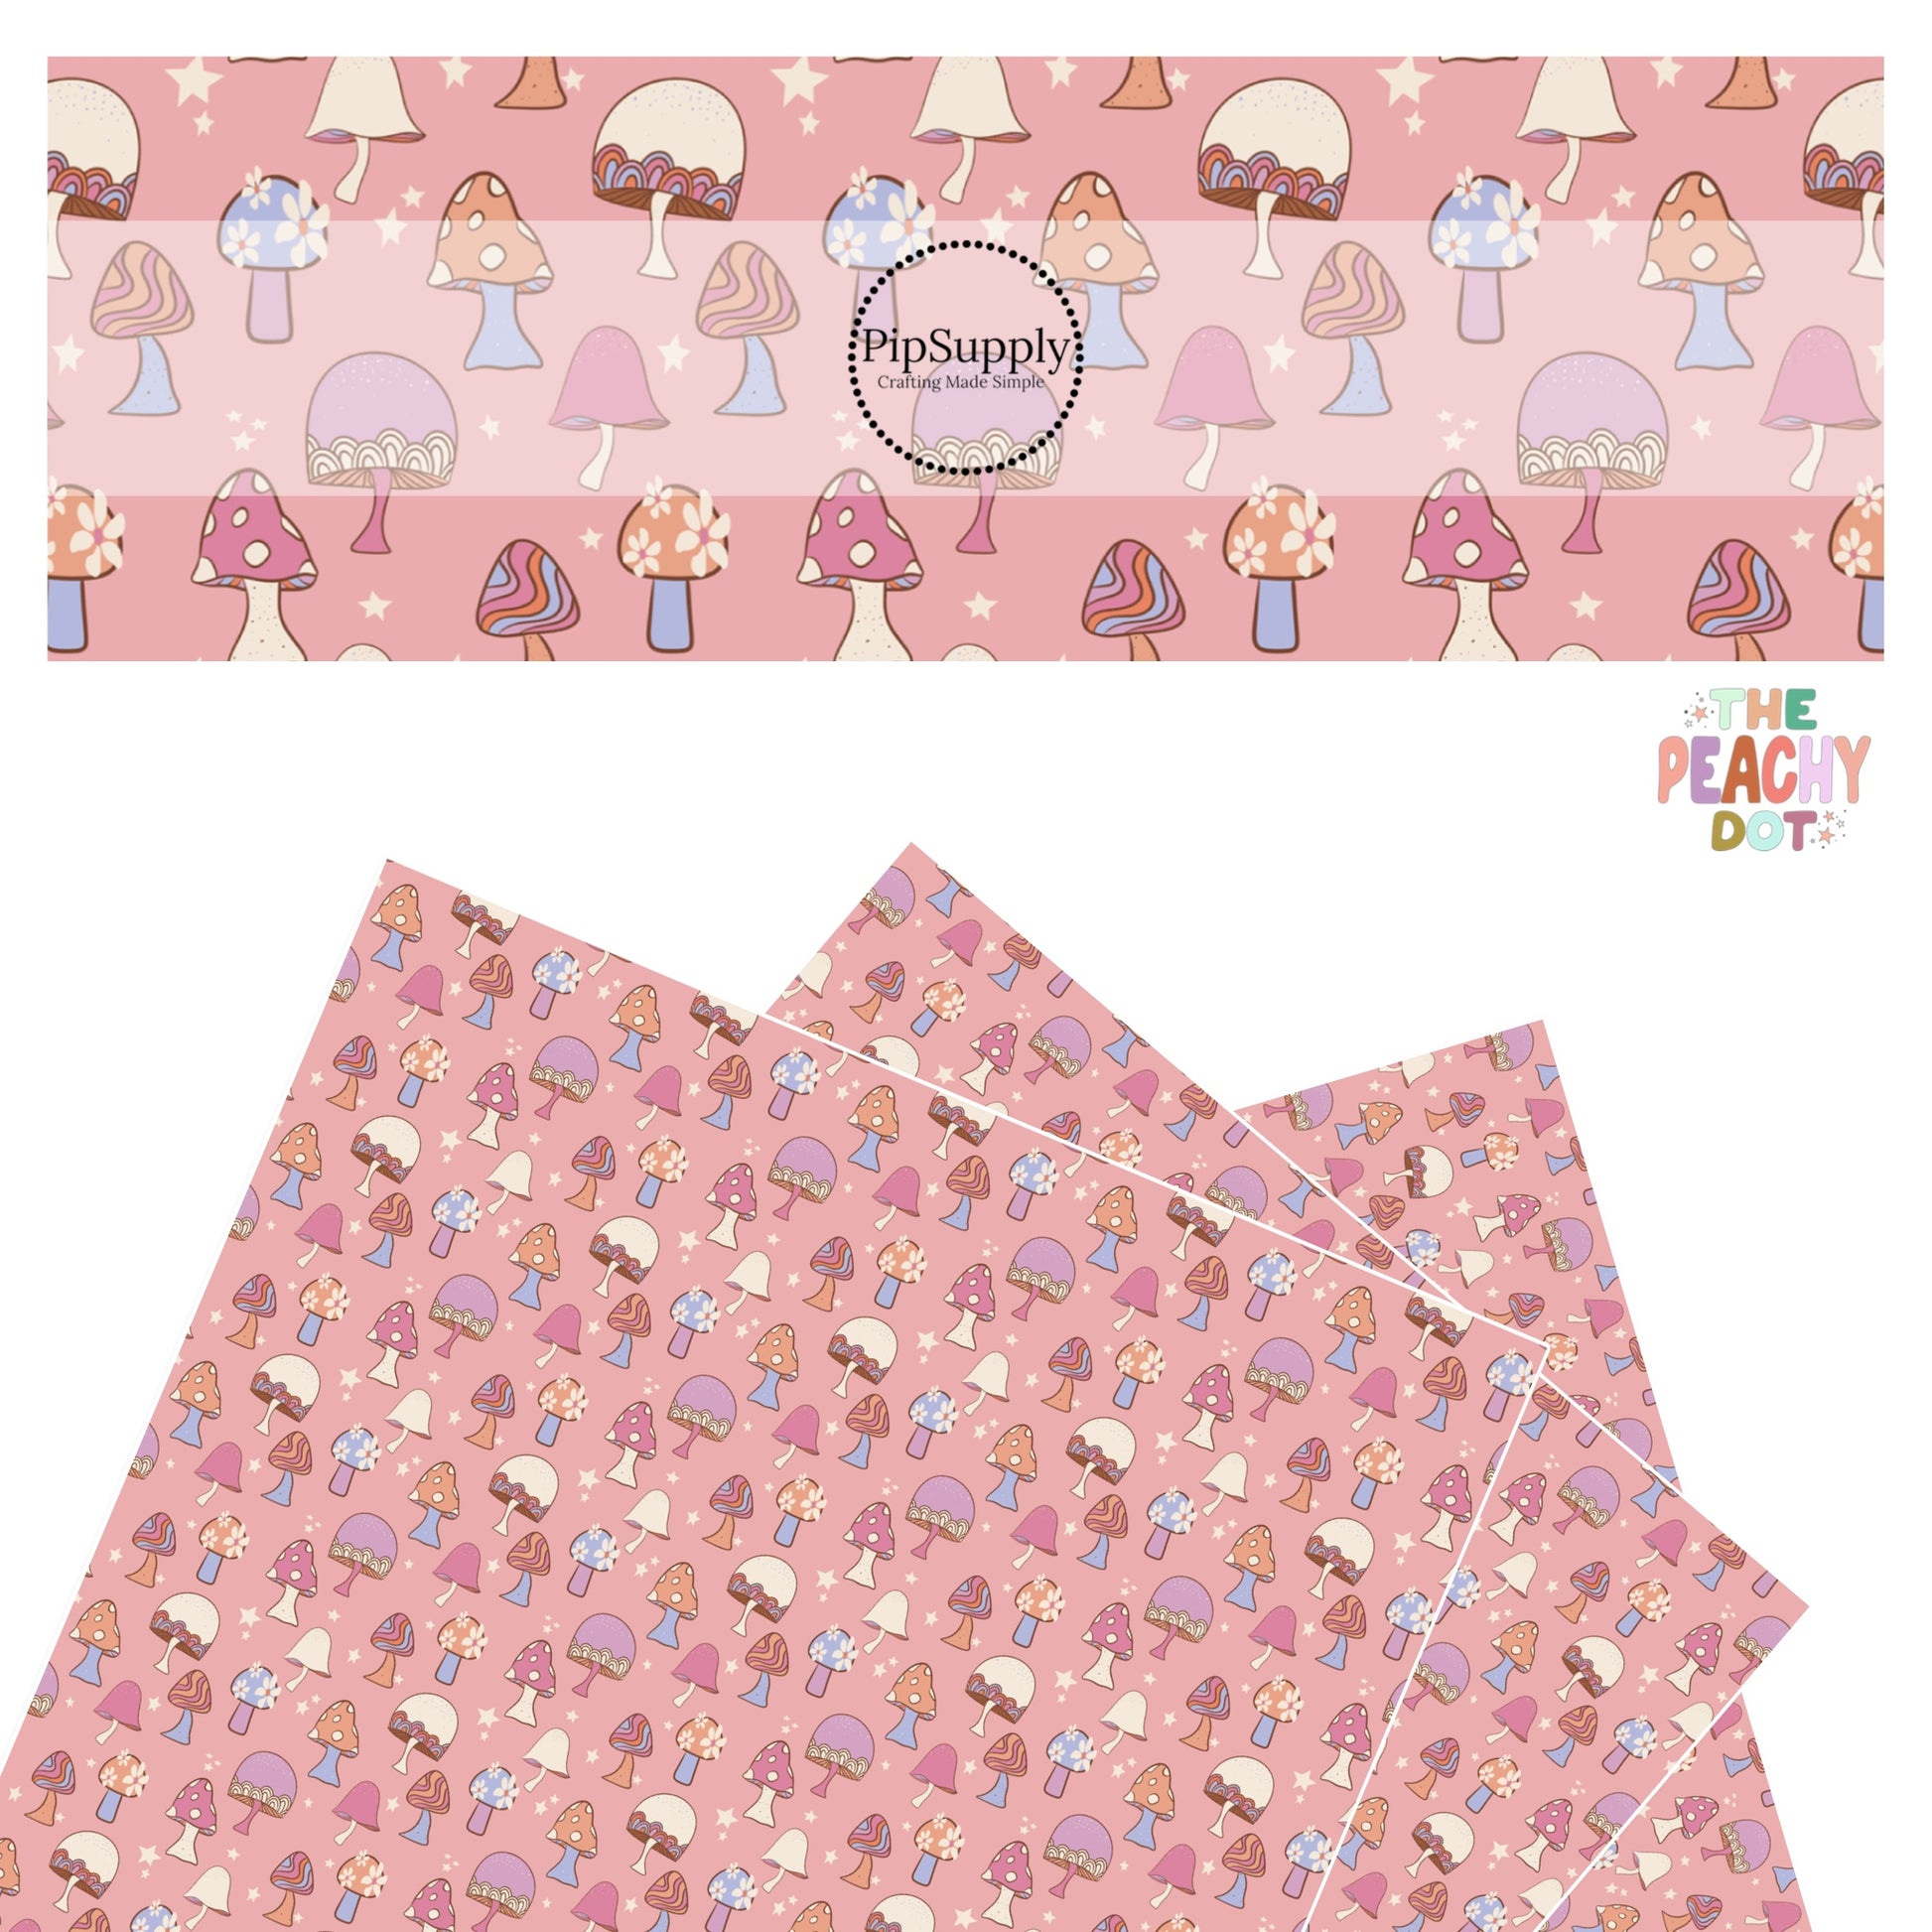 polka dot, swirly, and floral pink, blue, and orange mushrooms on pink faux leather sheets